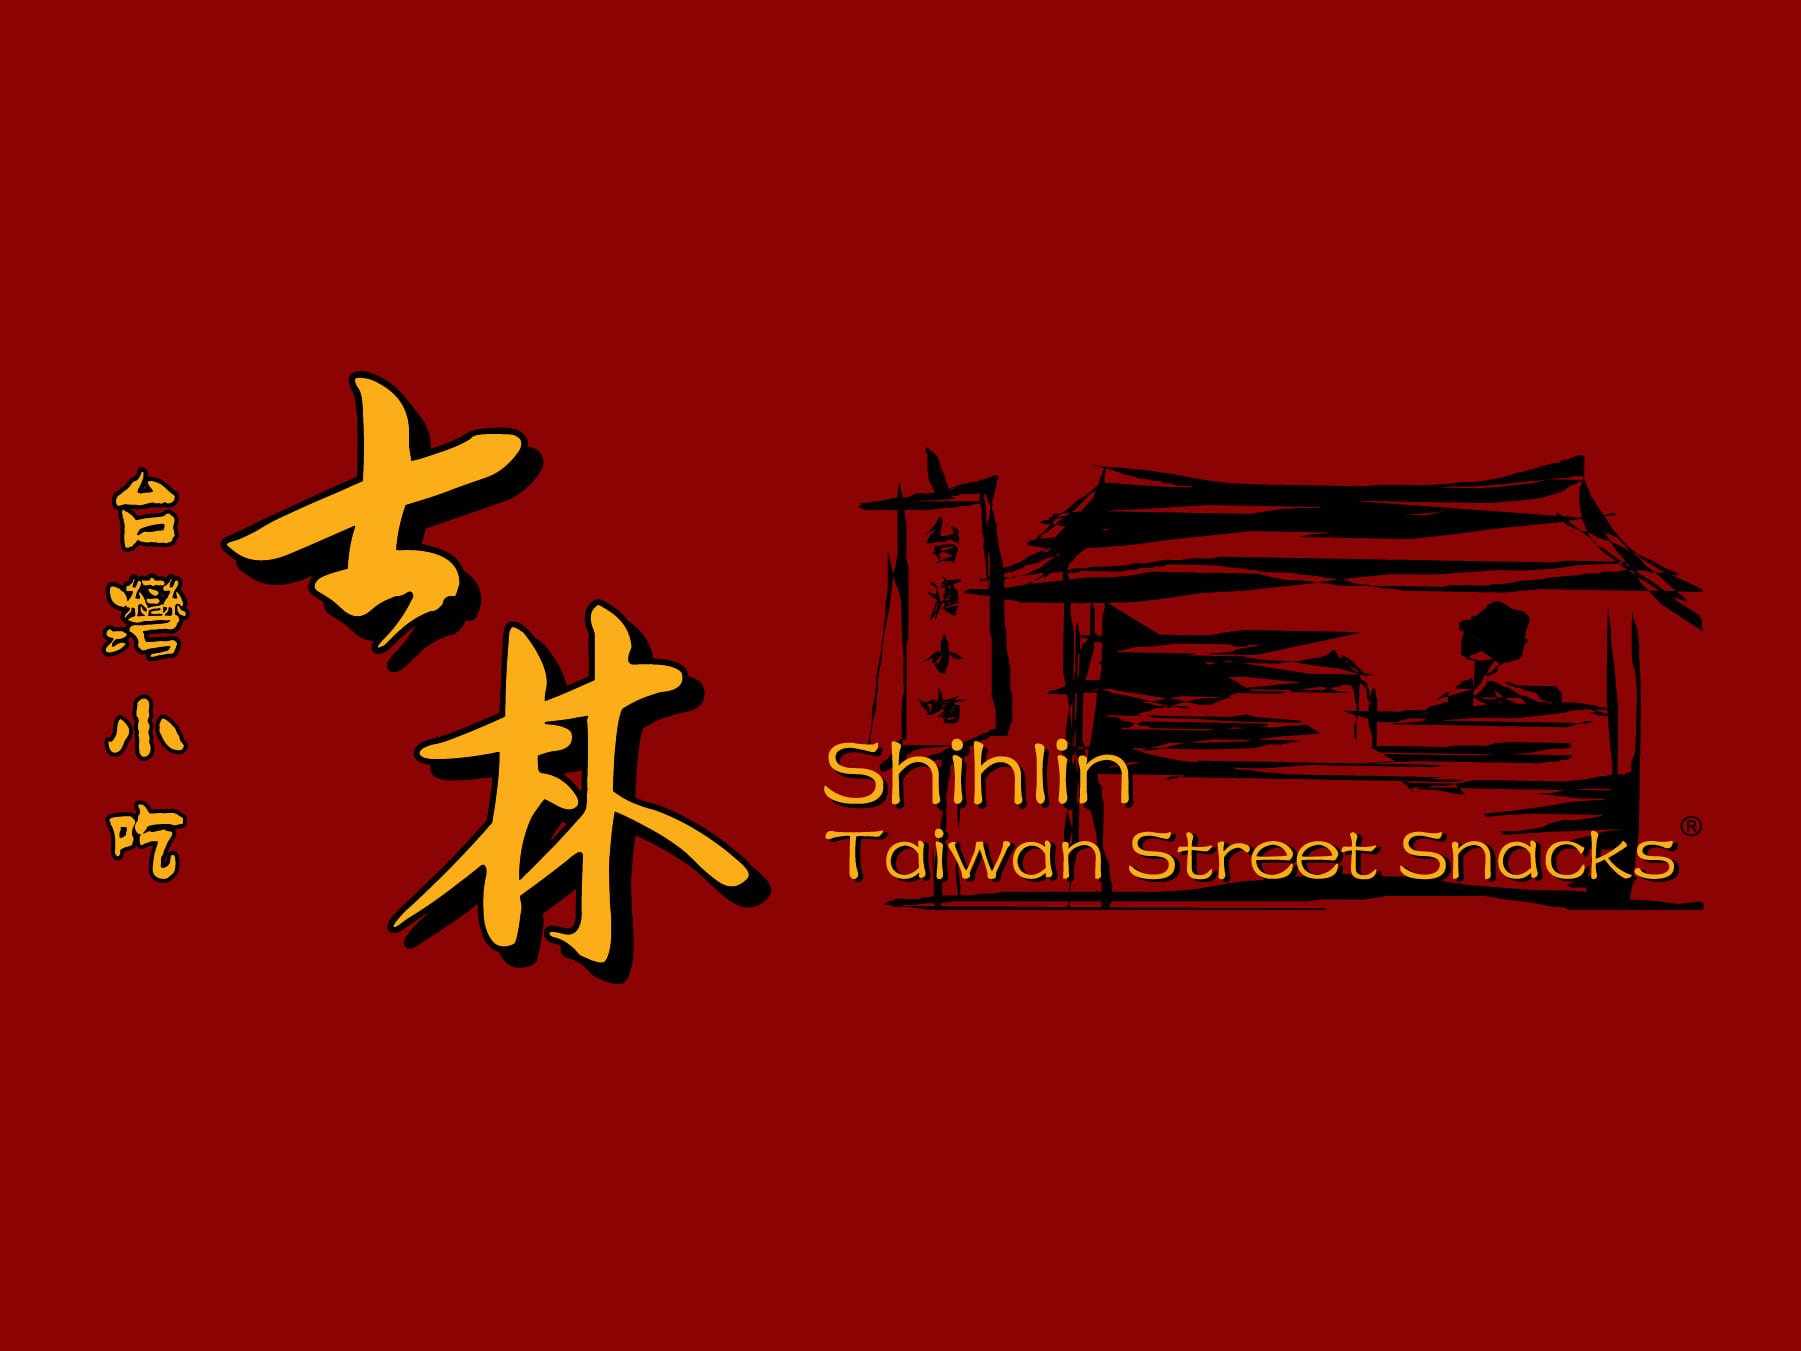 $4 Cash Voucher [Exclusive Deal] at Shihlin Taiwan Street Snacks - Get Deals, Cashback and Rewards with ShopBack GO